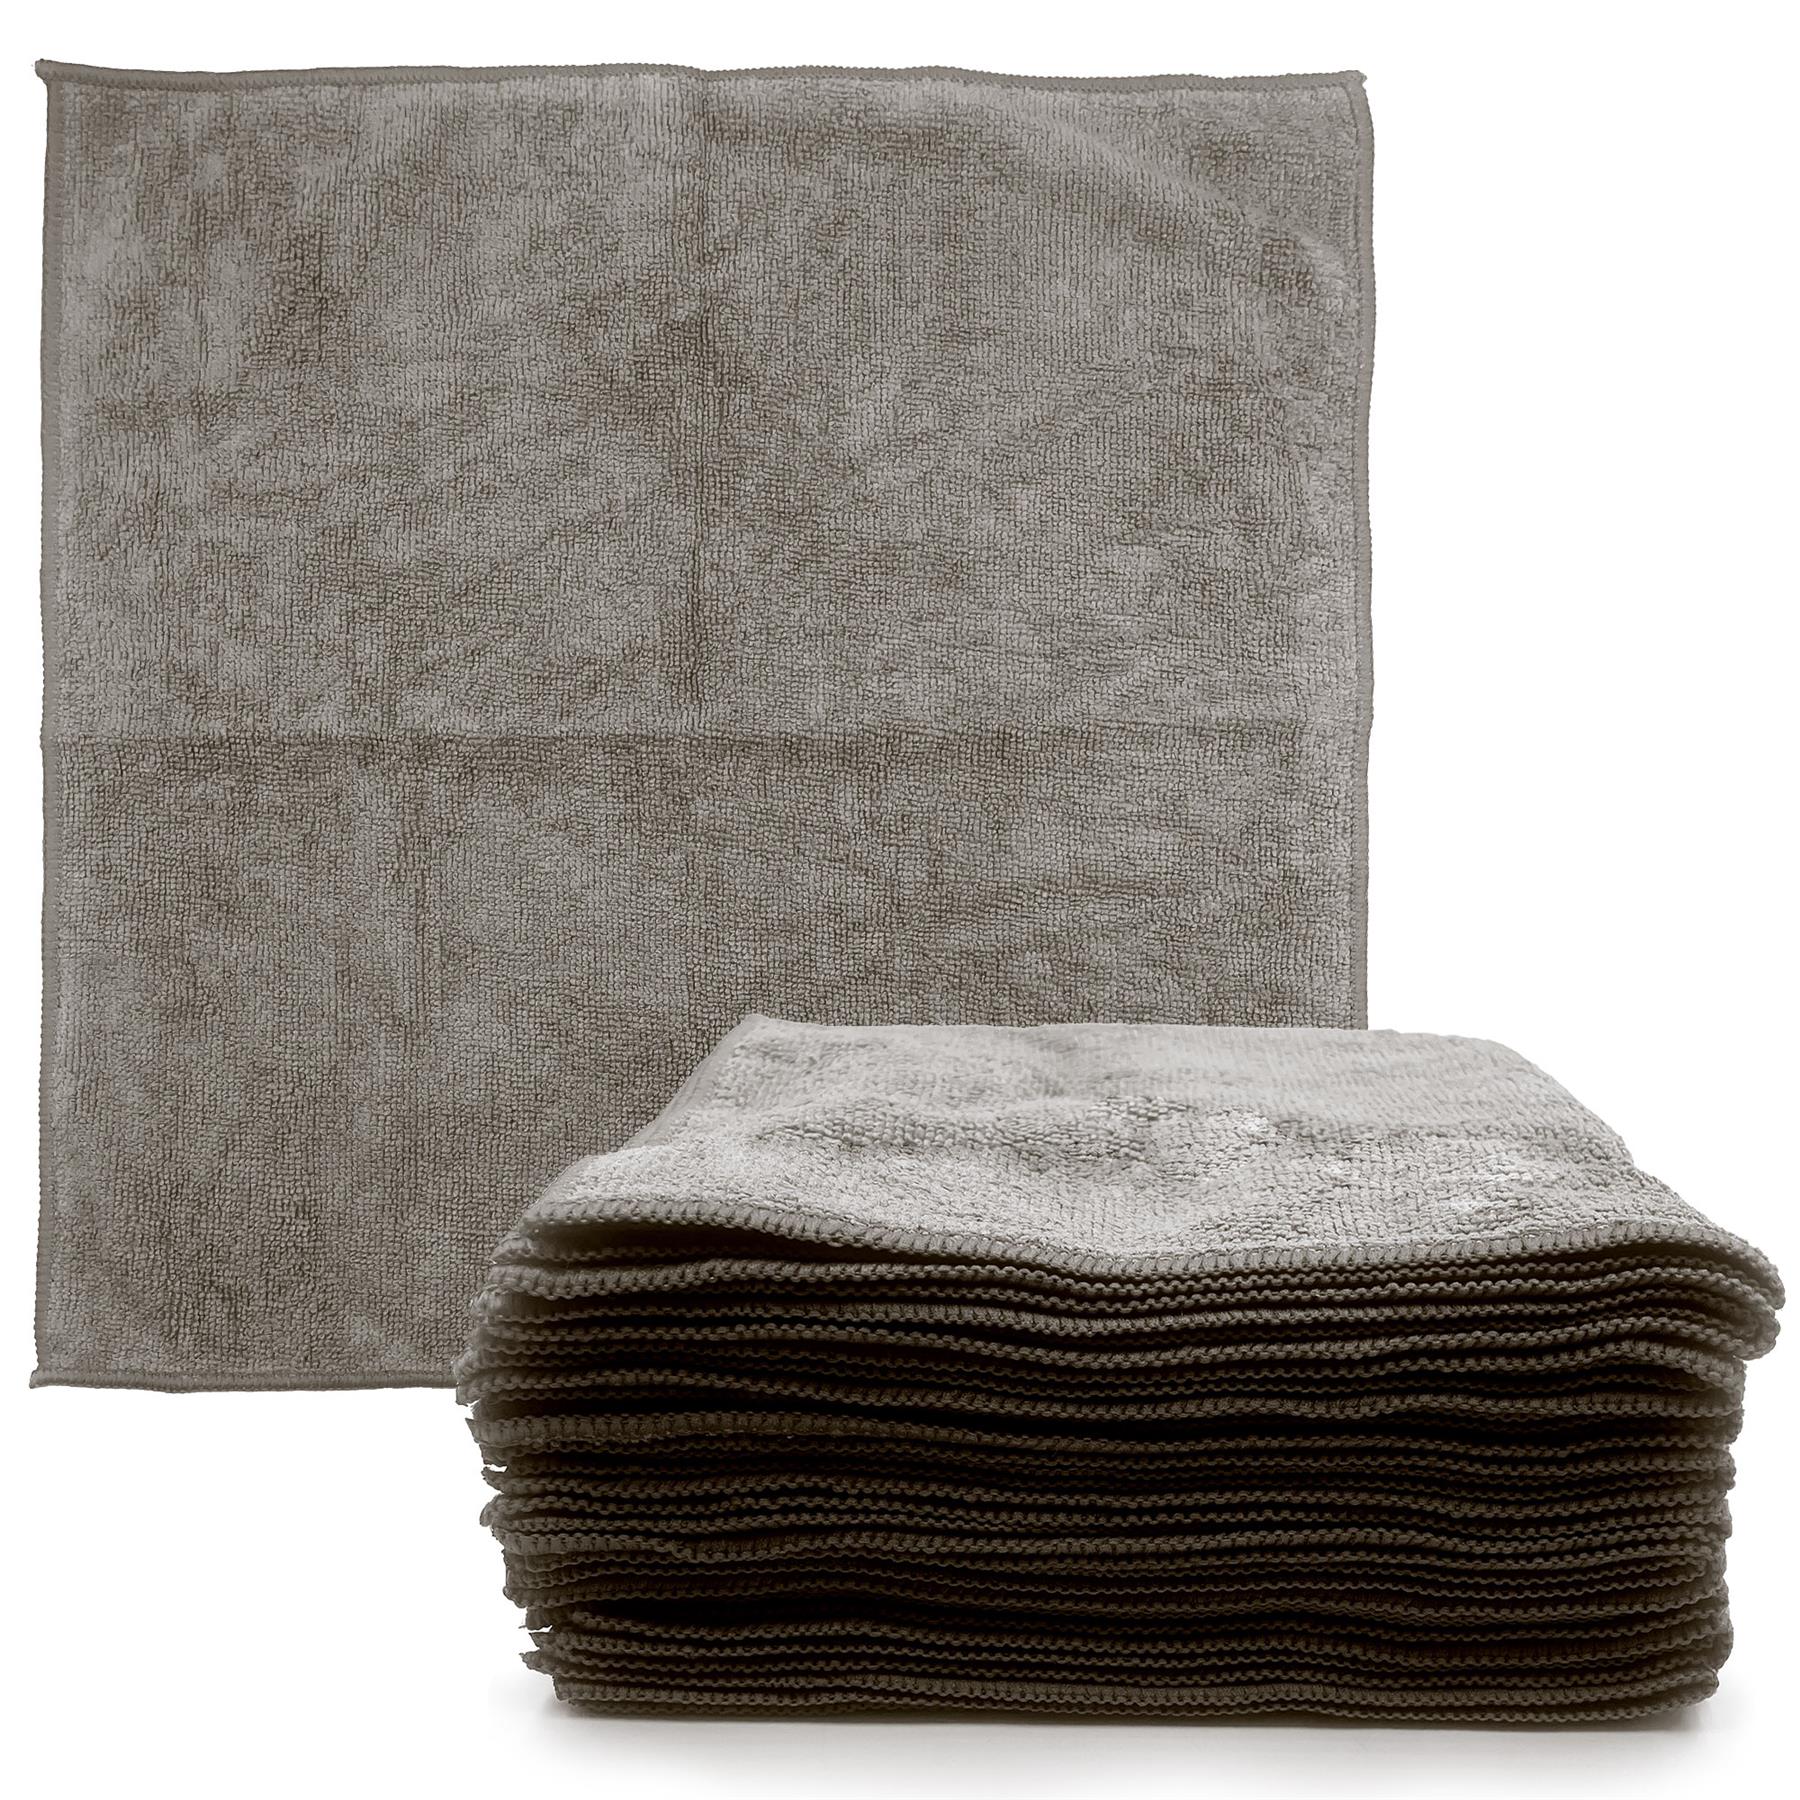 Large Grey Absorbant Multiputpose Microfibre Cleaning Cloths - Pack of 10